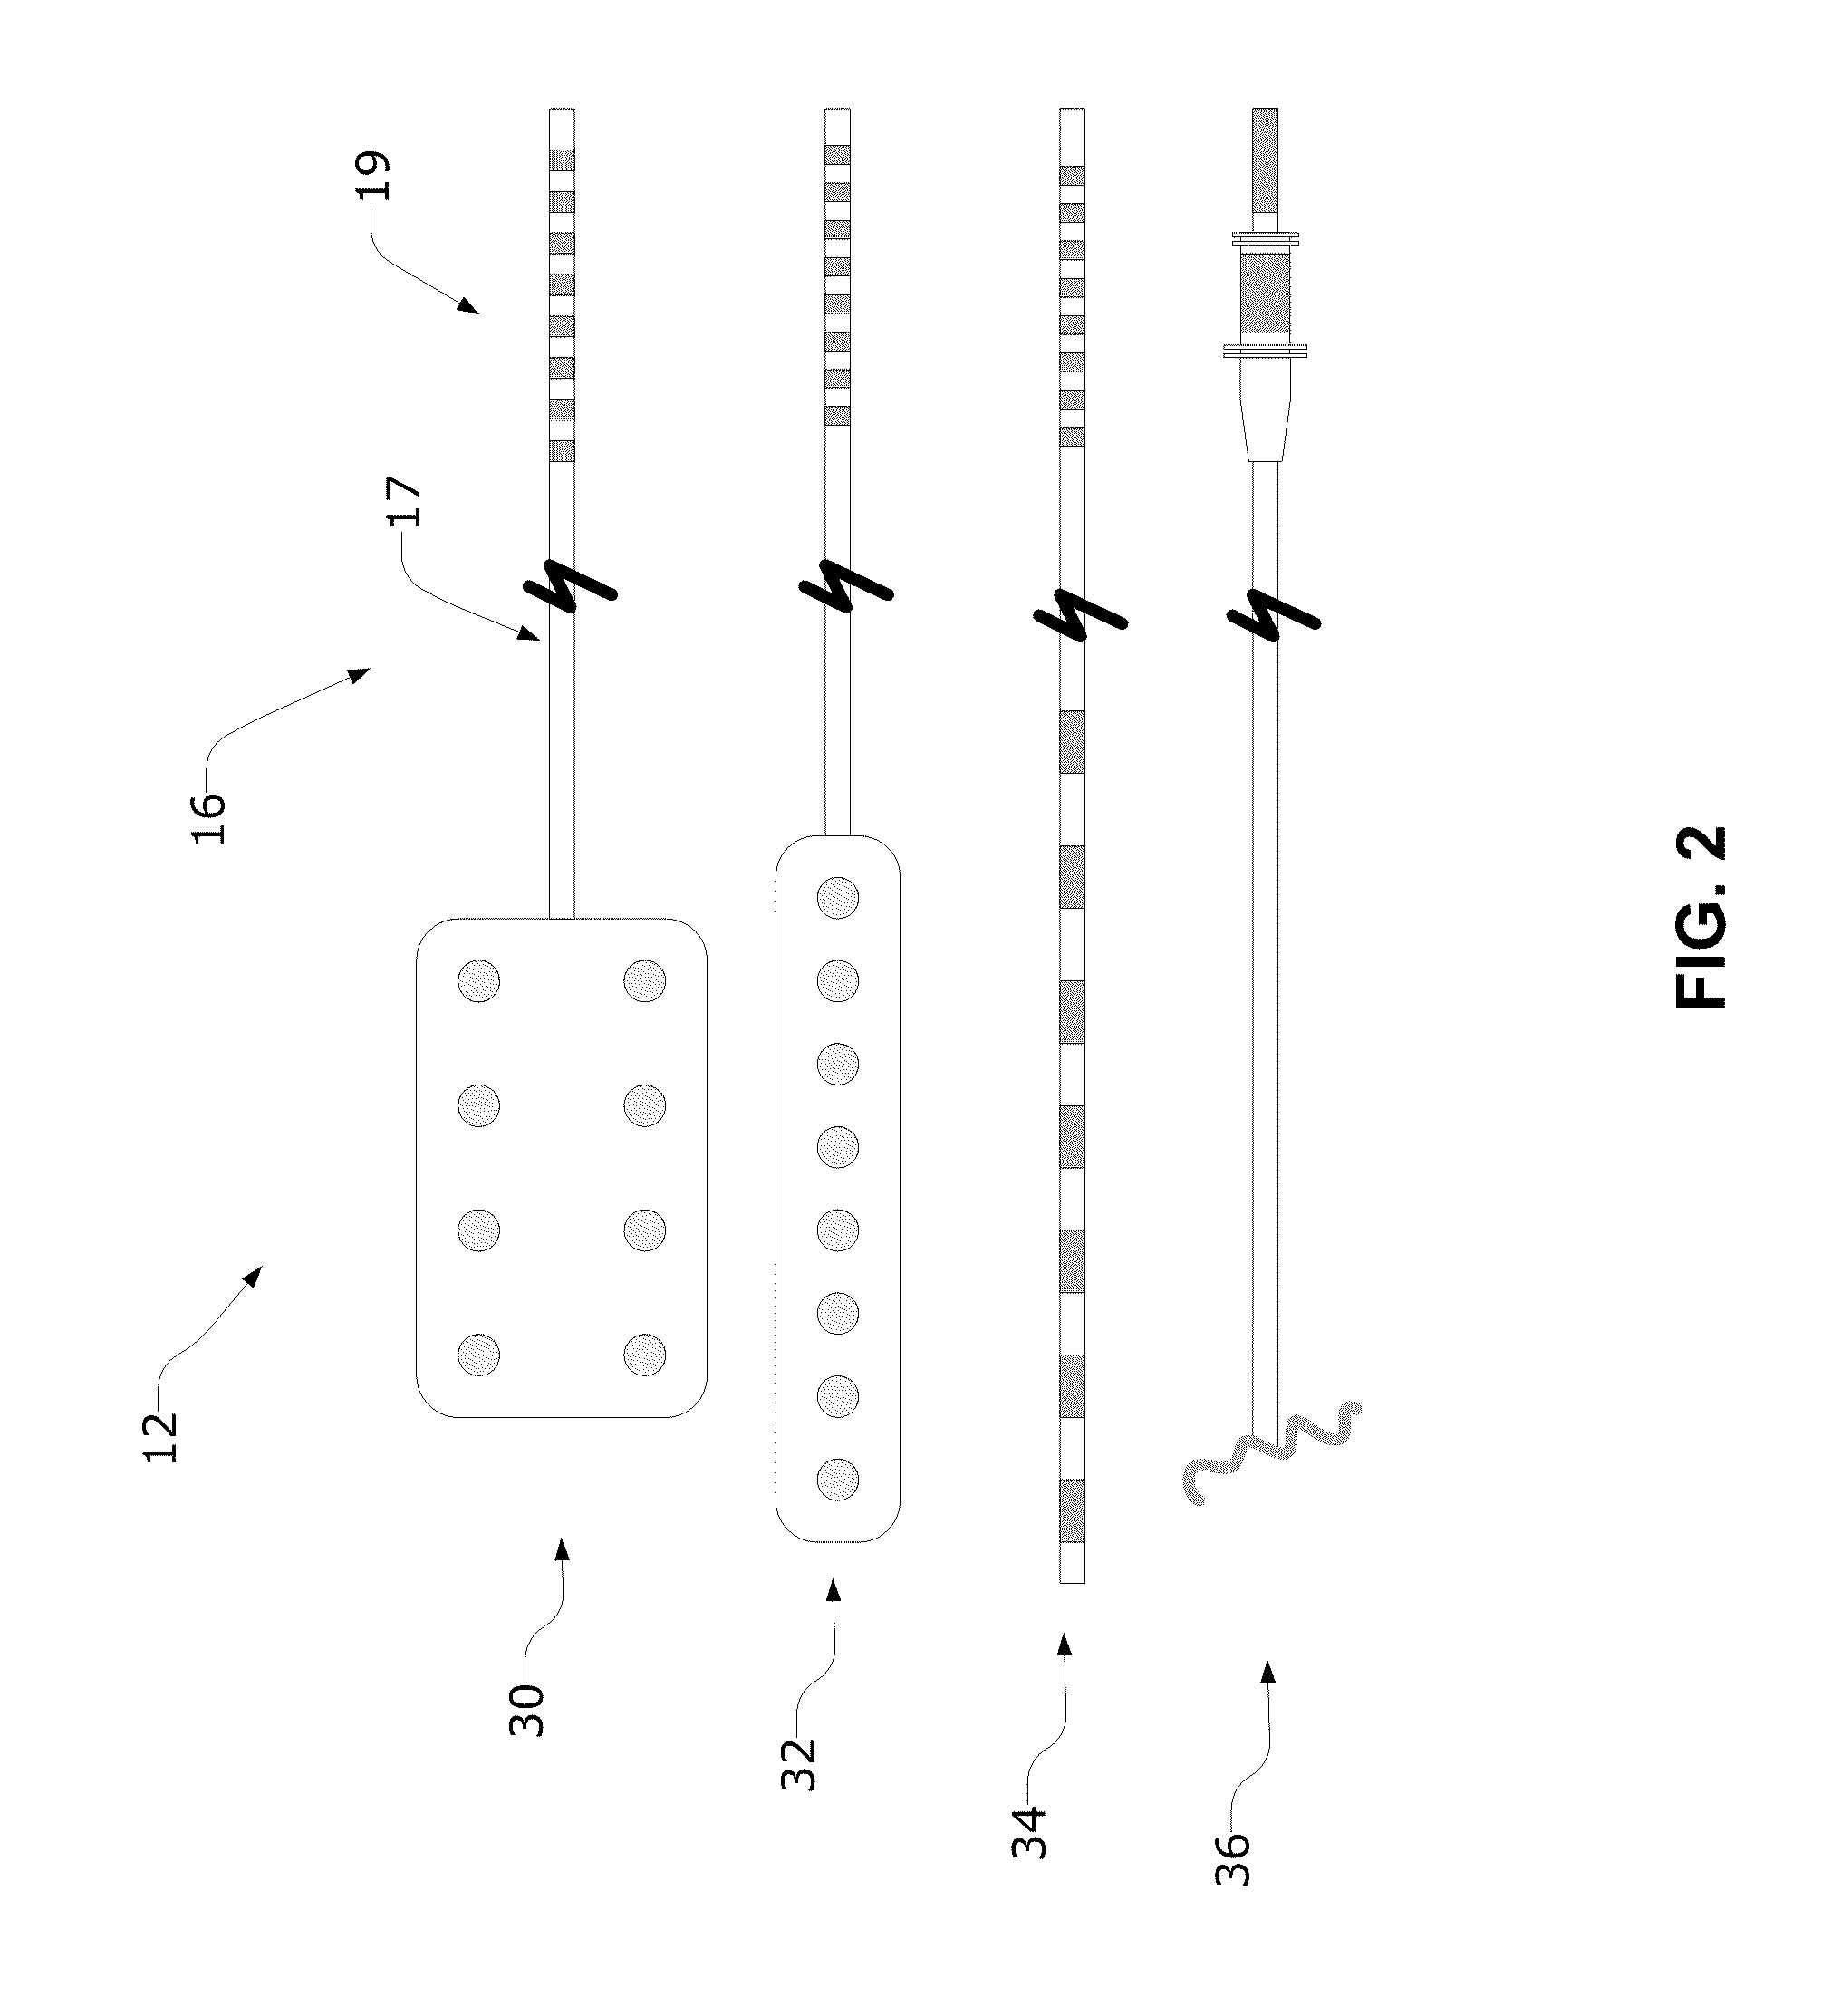 Patient Entry Recording in an Epilepsy Monitoring System